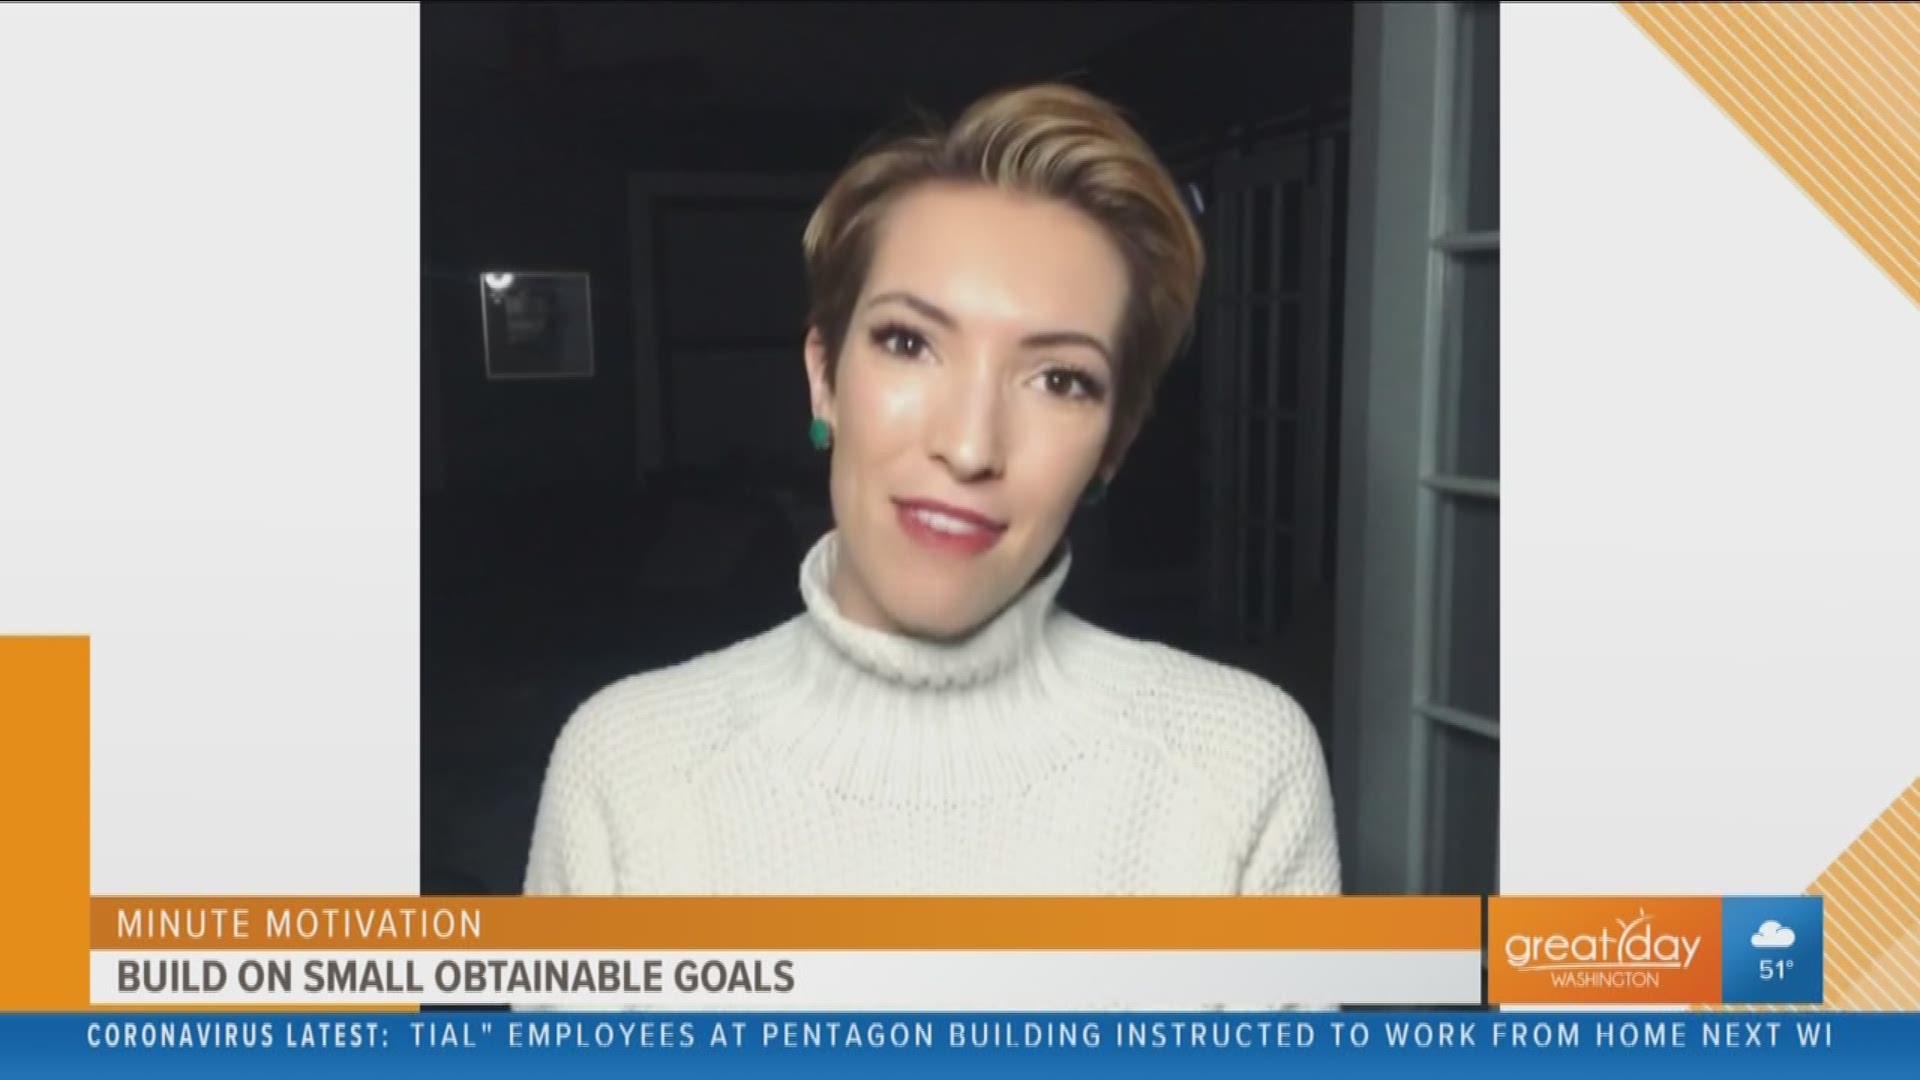 Ellen Bryan shares her Minute Motivation. Today she's suggesting to build on small obtainable goals, don't try to change your entire life all at once.